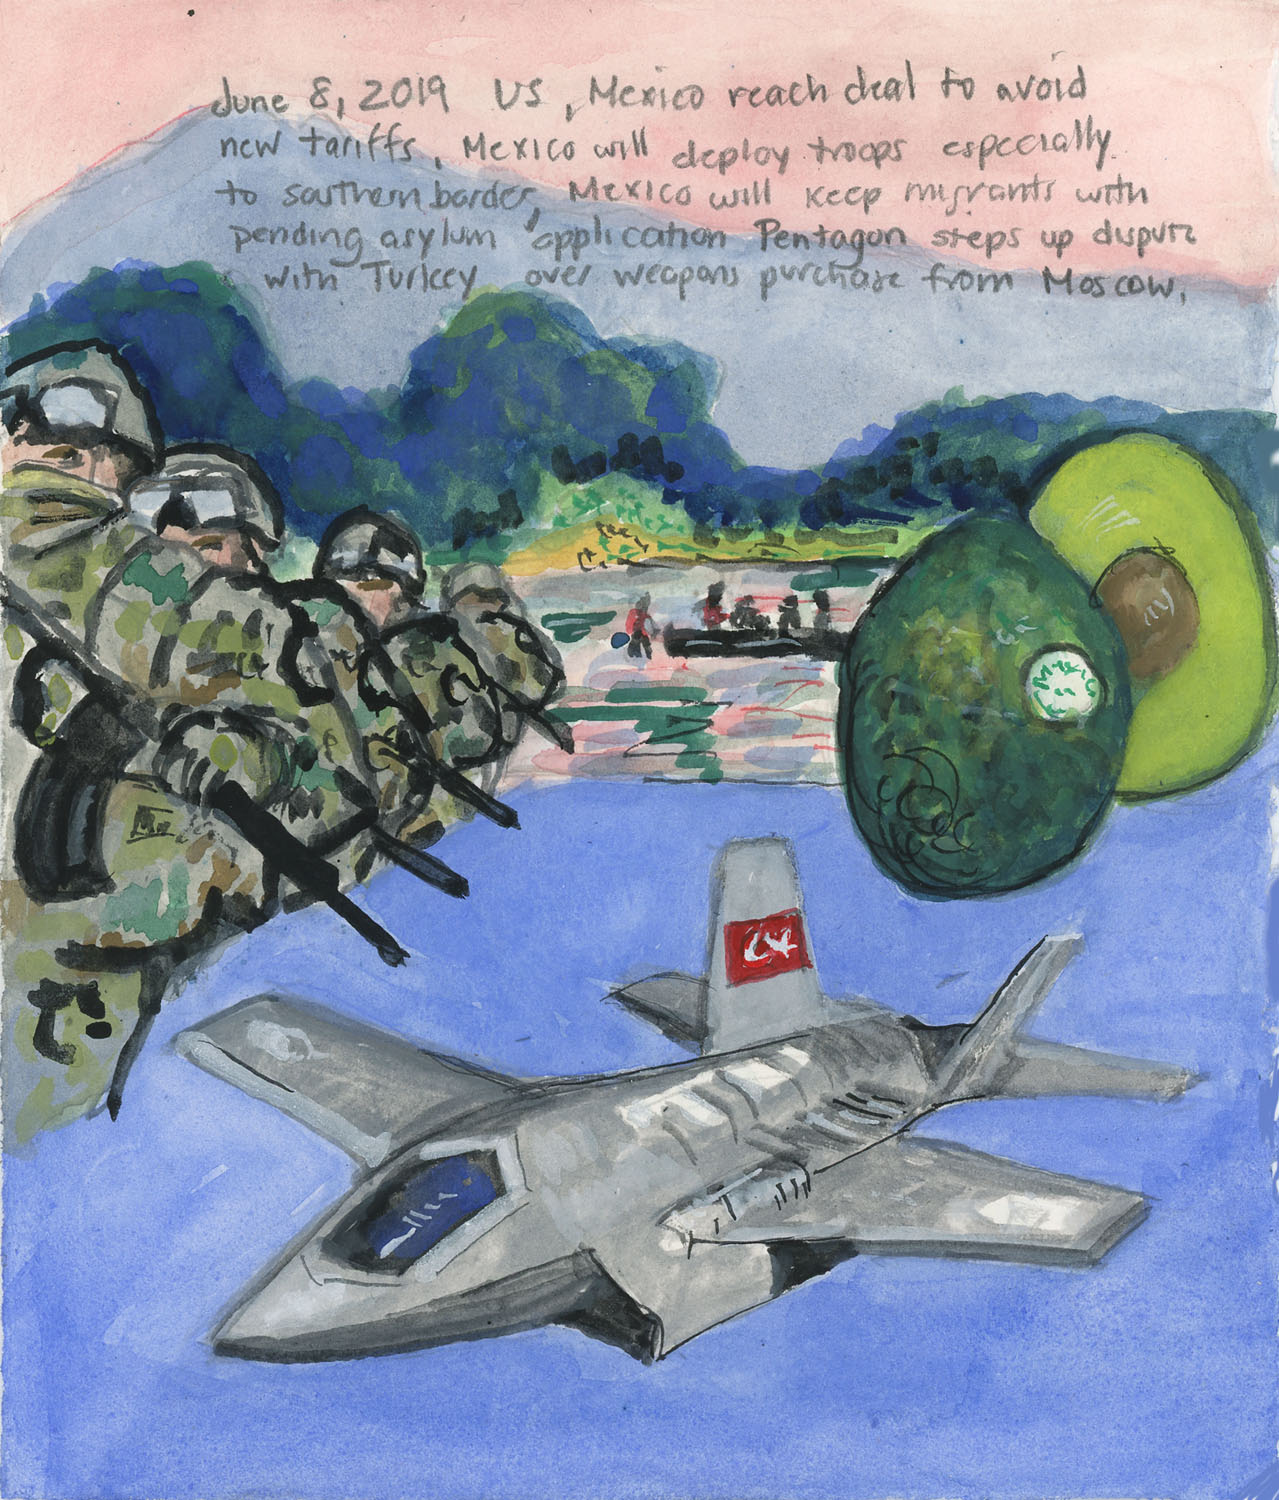 Day 1,295 (June 8, 2019) <br>Gouache, Watercolor, graphite on paper, 6 ½ x 5 ½ in.<br><i>US, Mexico reach deal to avoid new tariffs, Mexico will deploy troops especially to southern border, Mexico will keep migrants with pending asylum application Pentagon steps up dispute with Turkey over weapons purchase from Moscow.</i> 